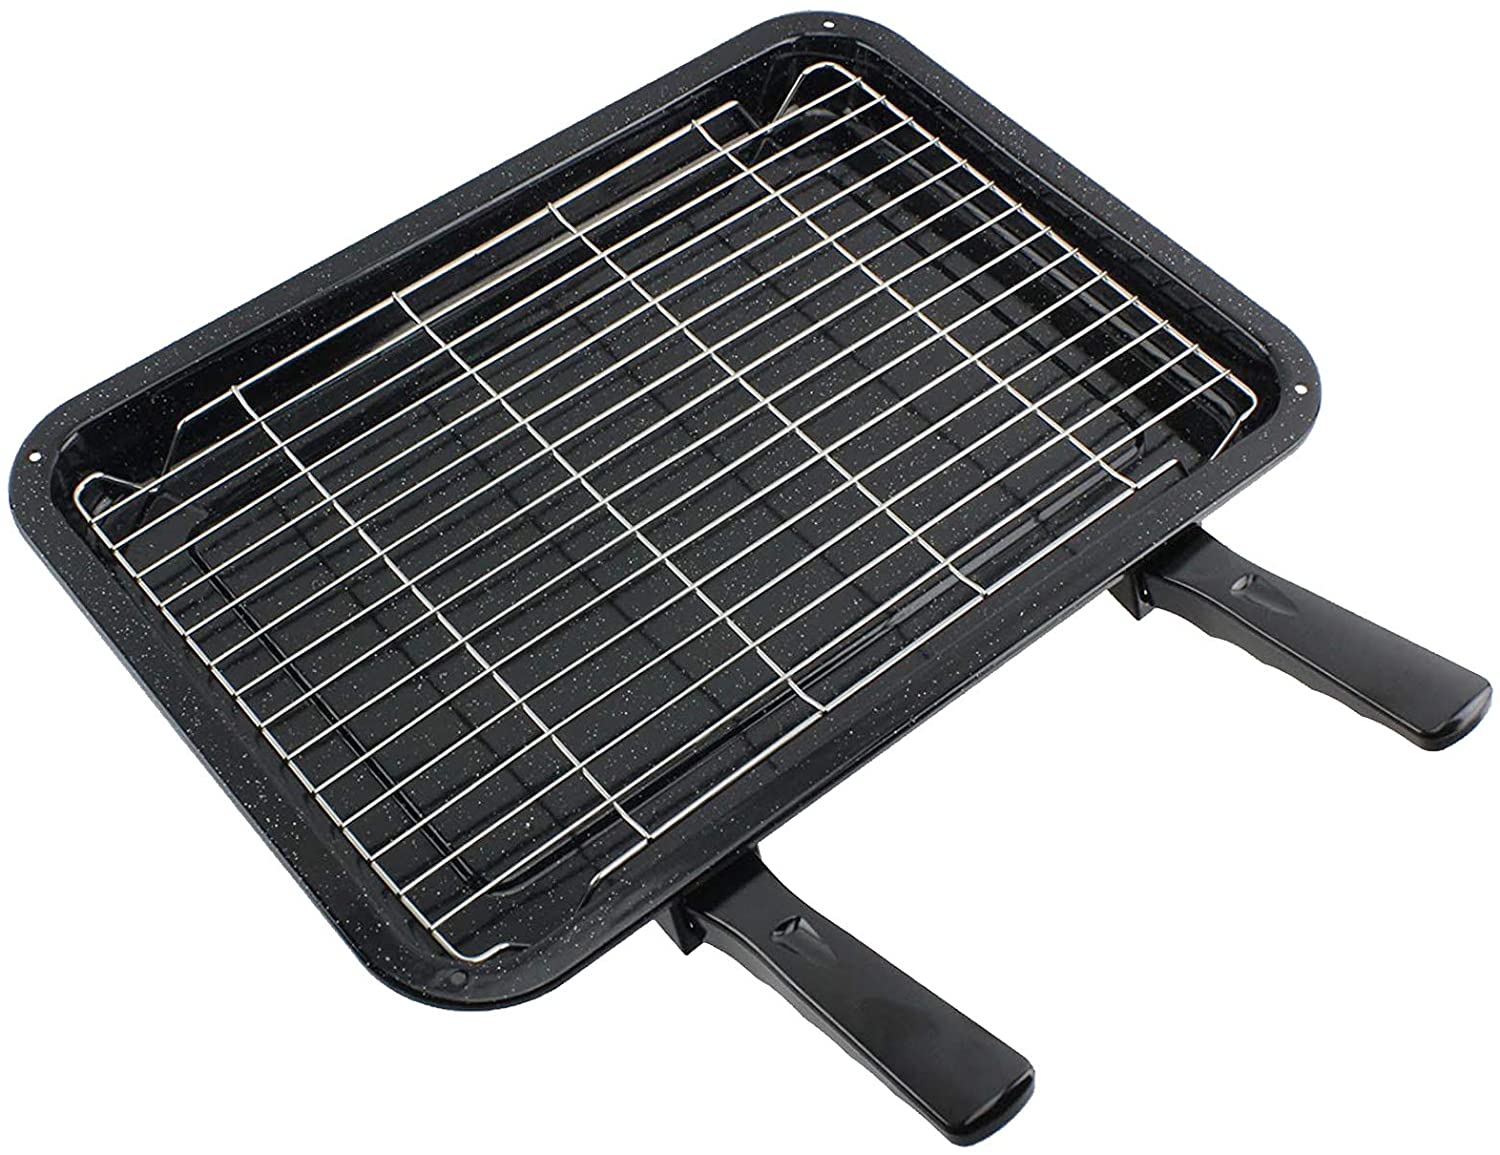 Medium Grill Pan, Rack & Dual Detachable Handles with Adjustable Shelf for HYGENA Oven Cookers